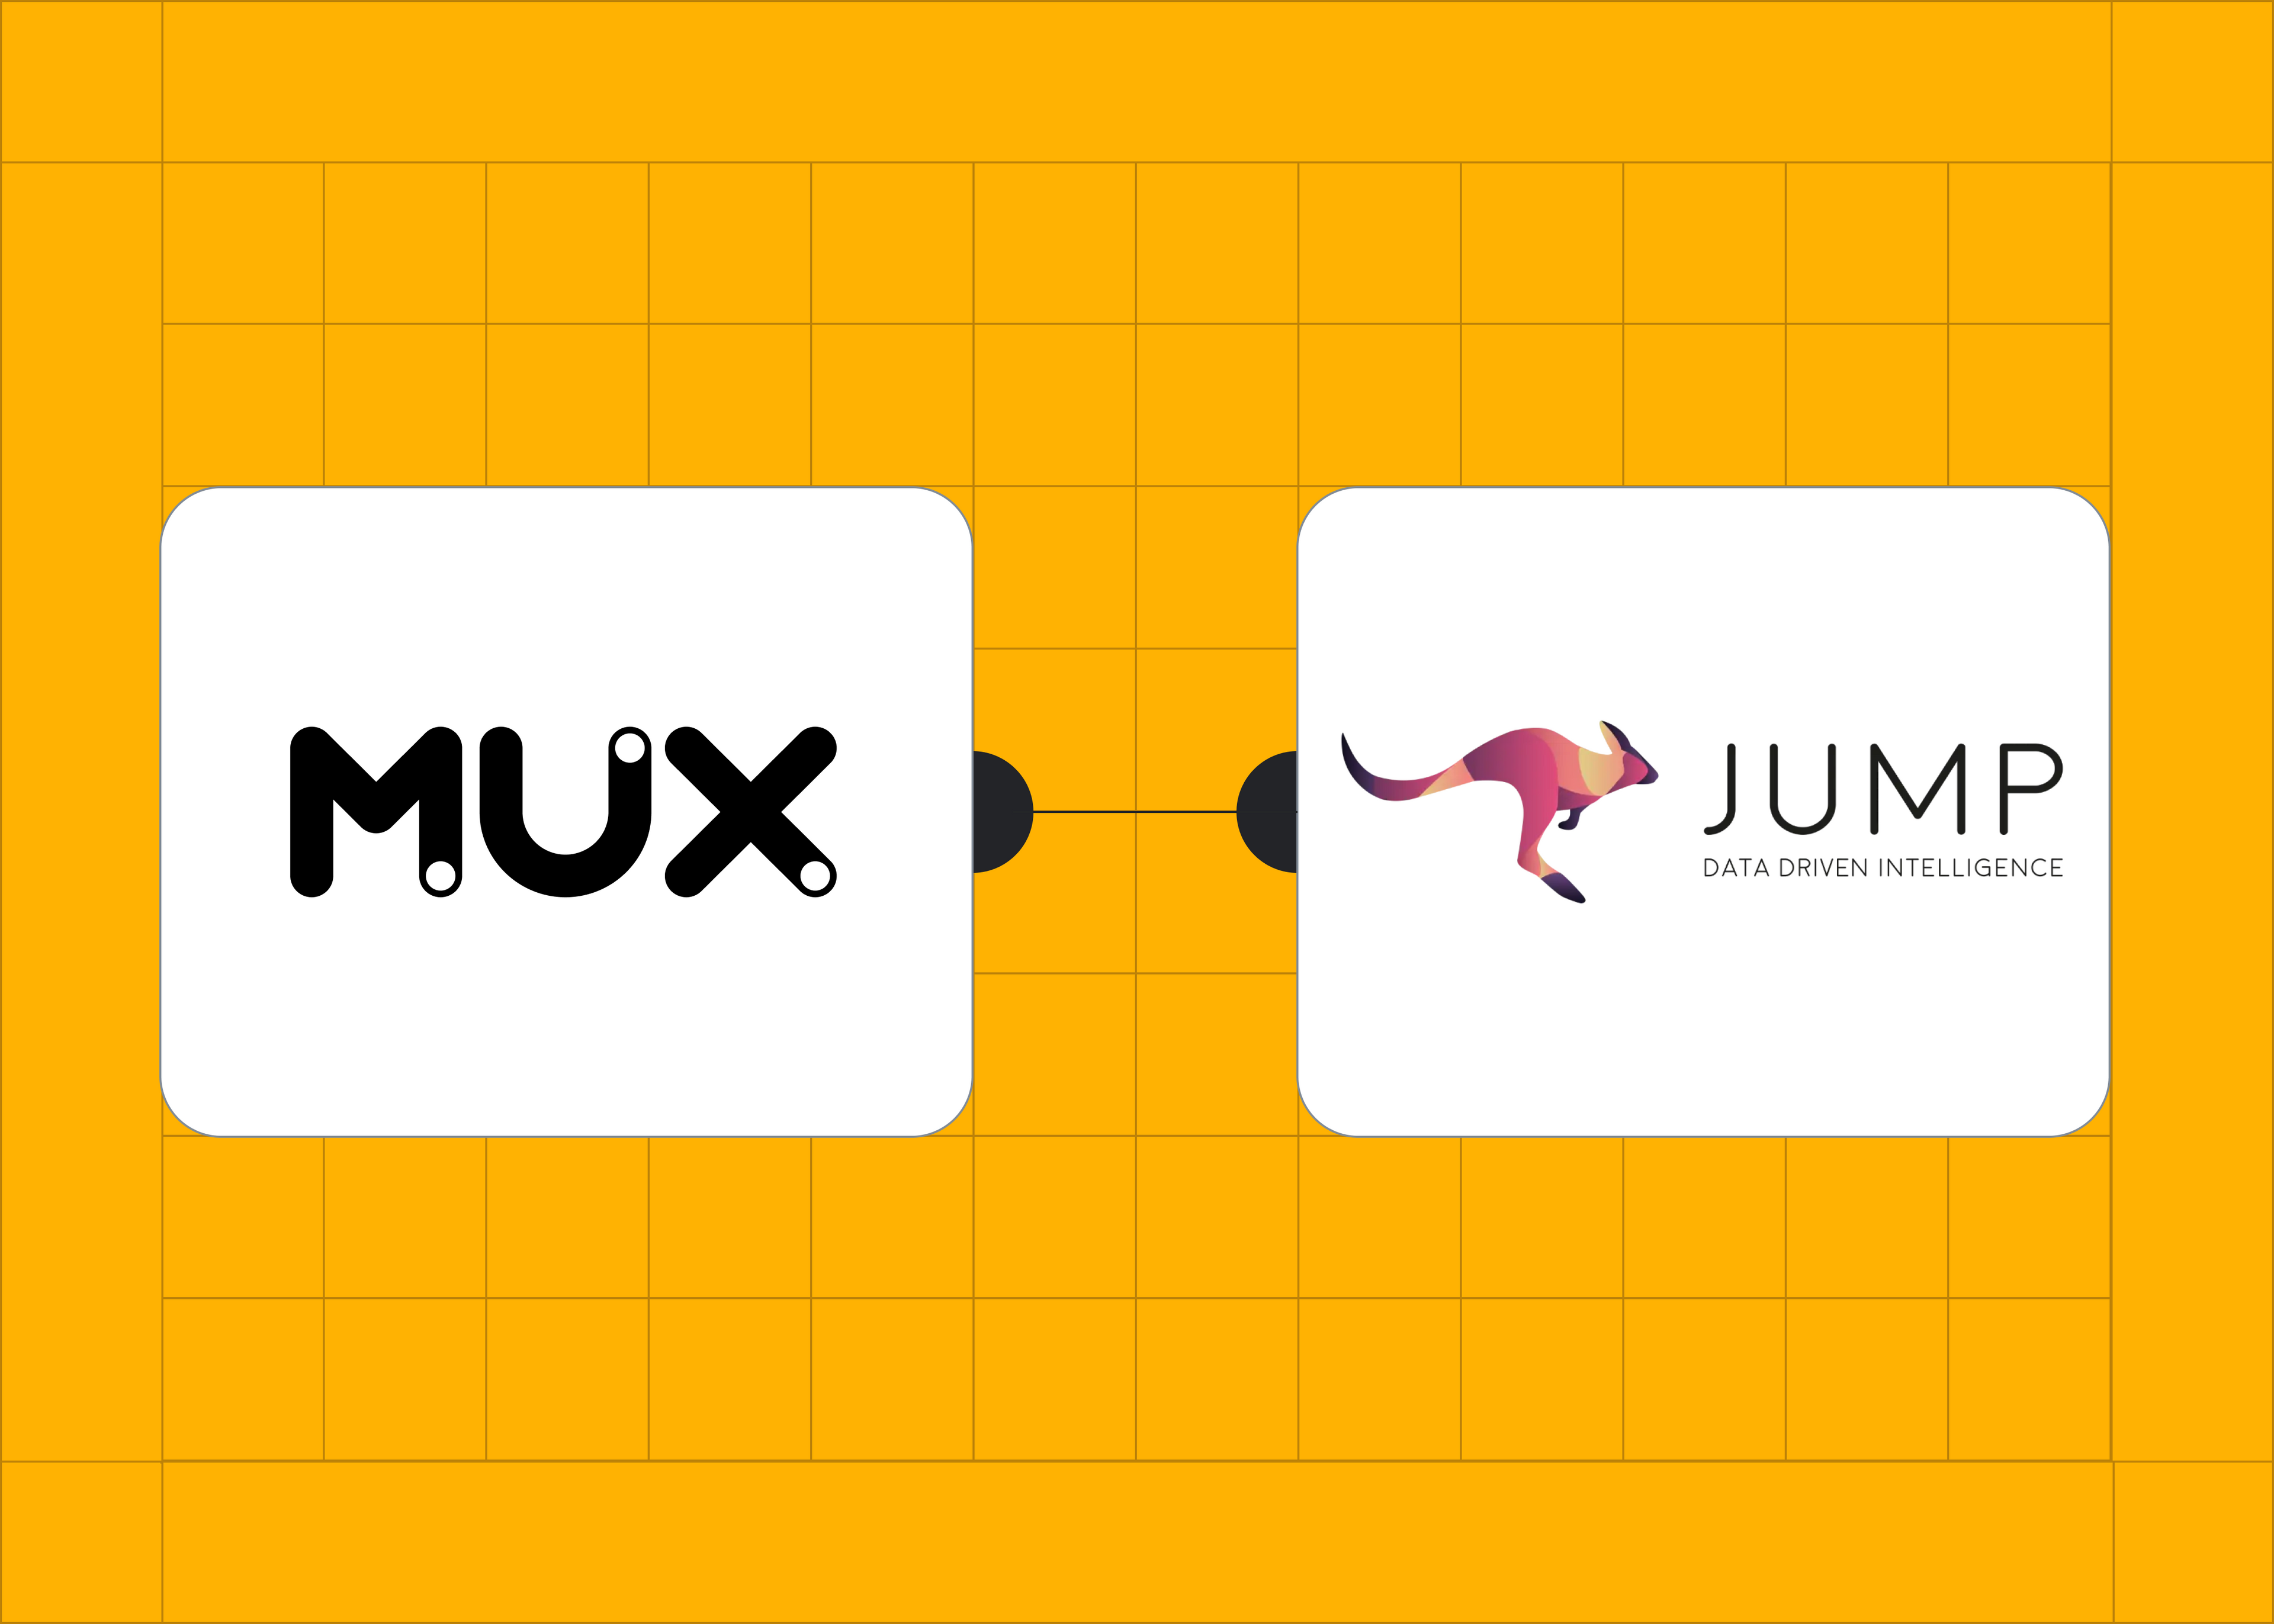 A partnership design featuring the Mux and Jump logos